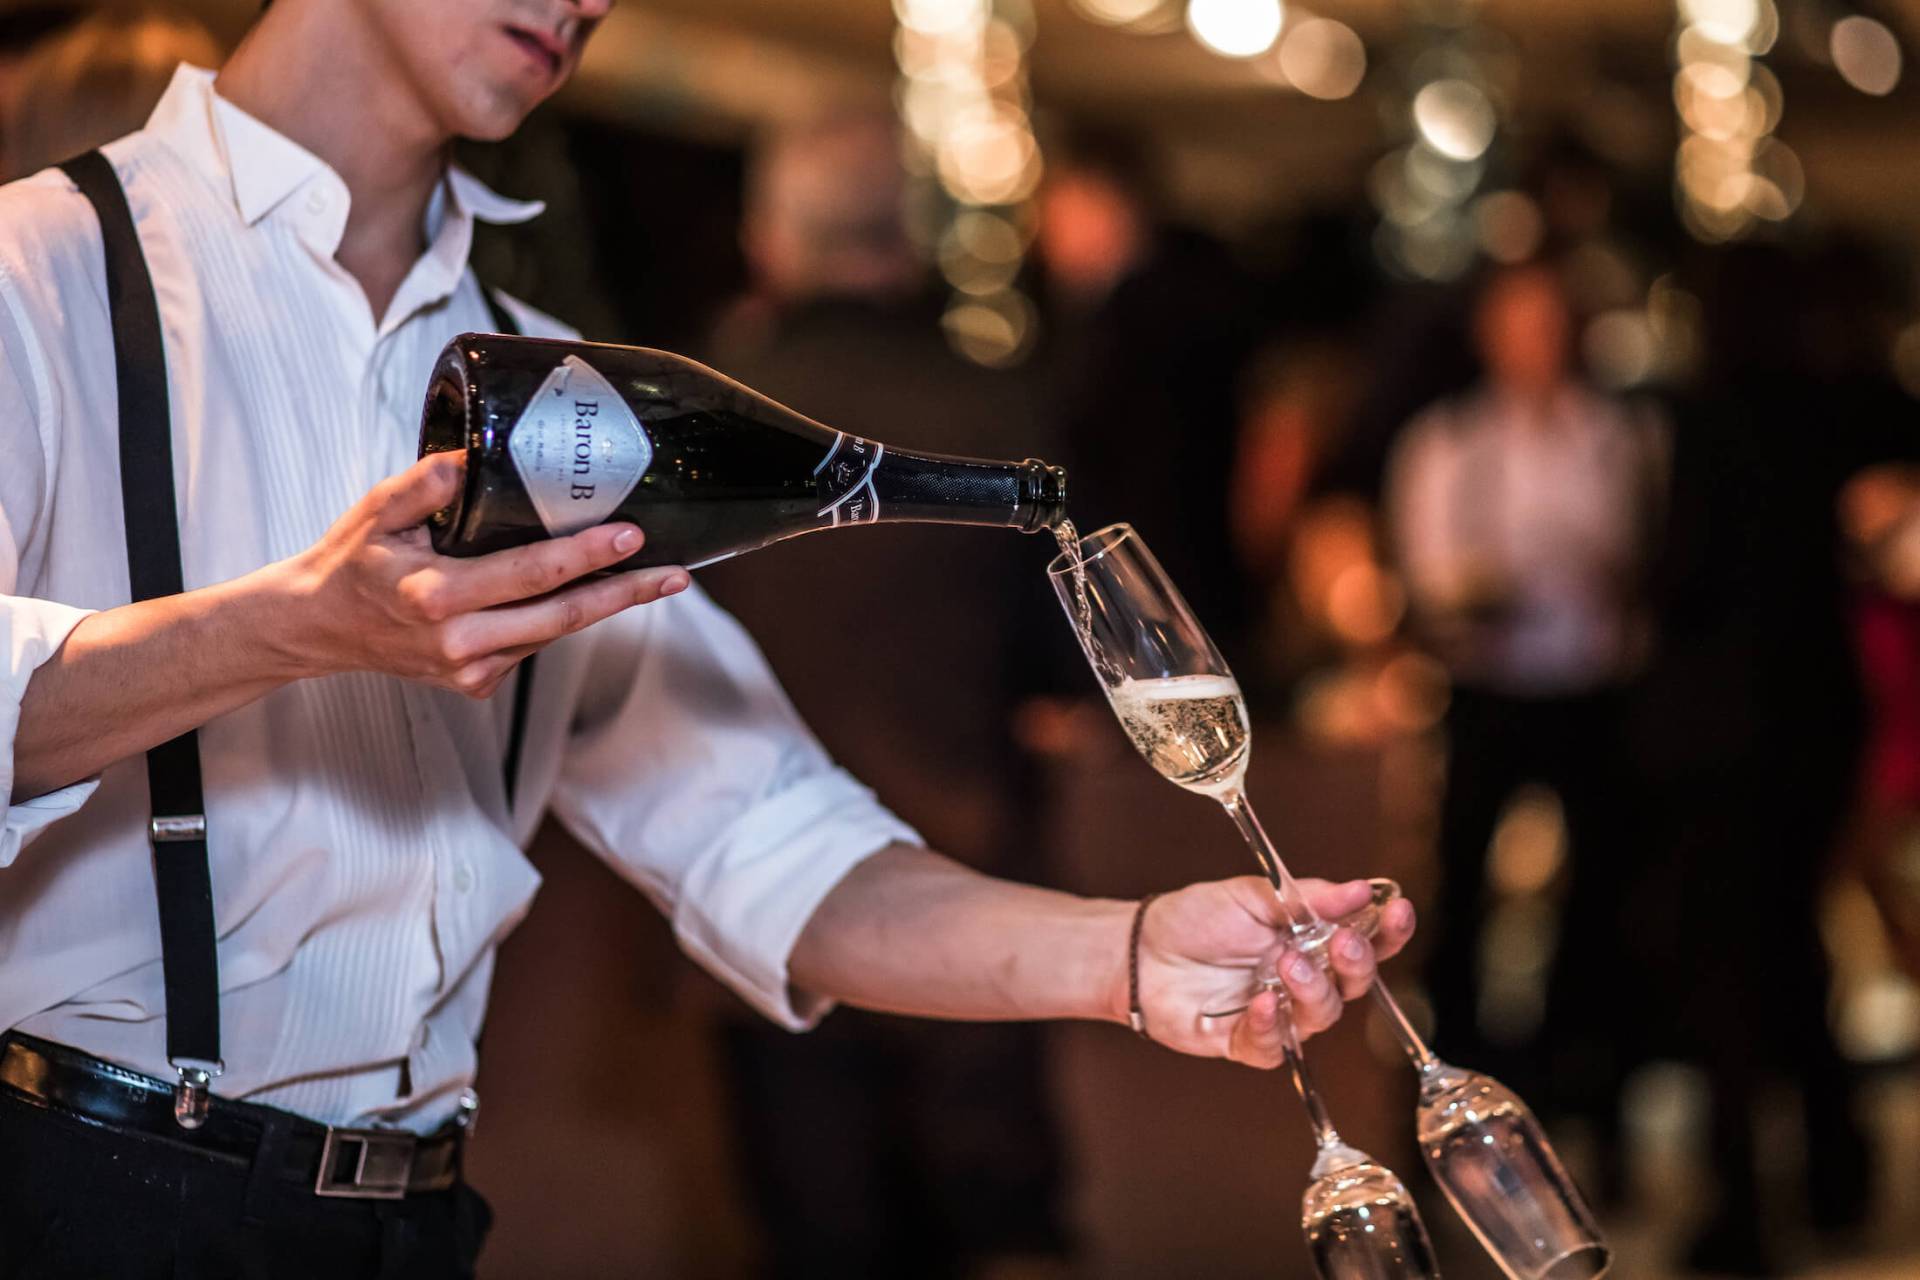 server in white shirt and suspenders pours open bottle of sparkling wine into wine flute